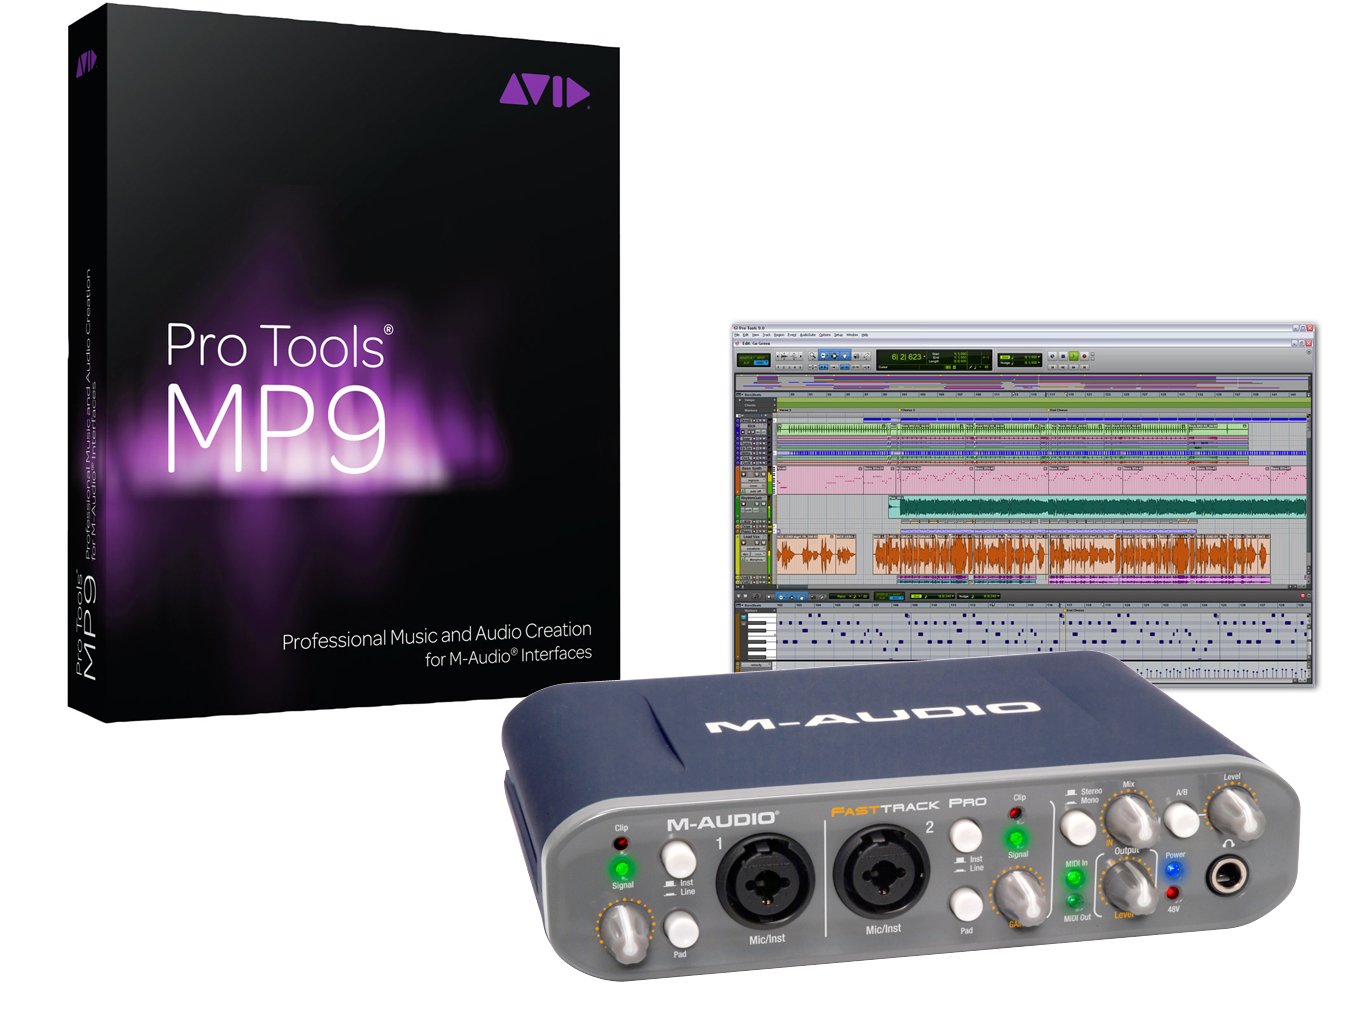 Avid Pro Tools MP 9 Software and M-Audio Fast Track Pro Pack